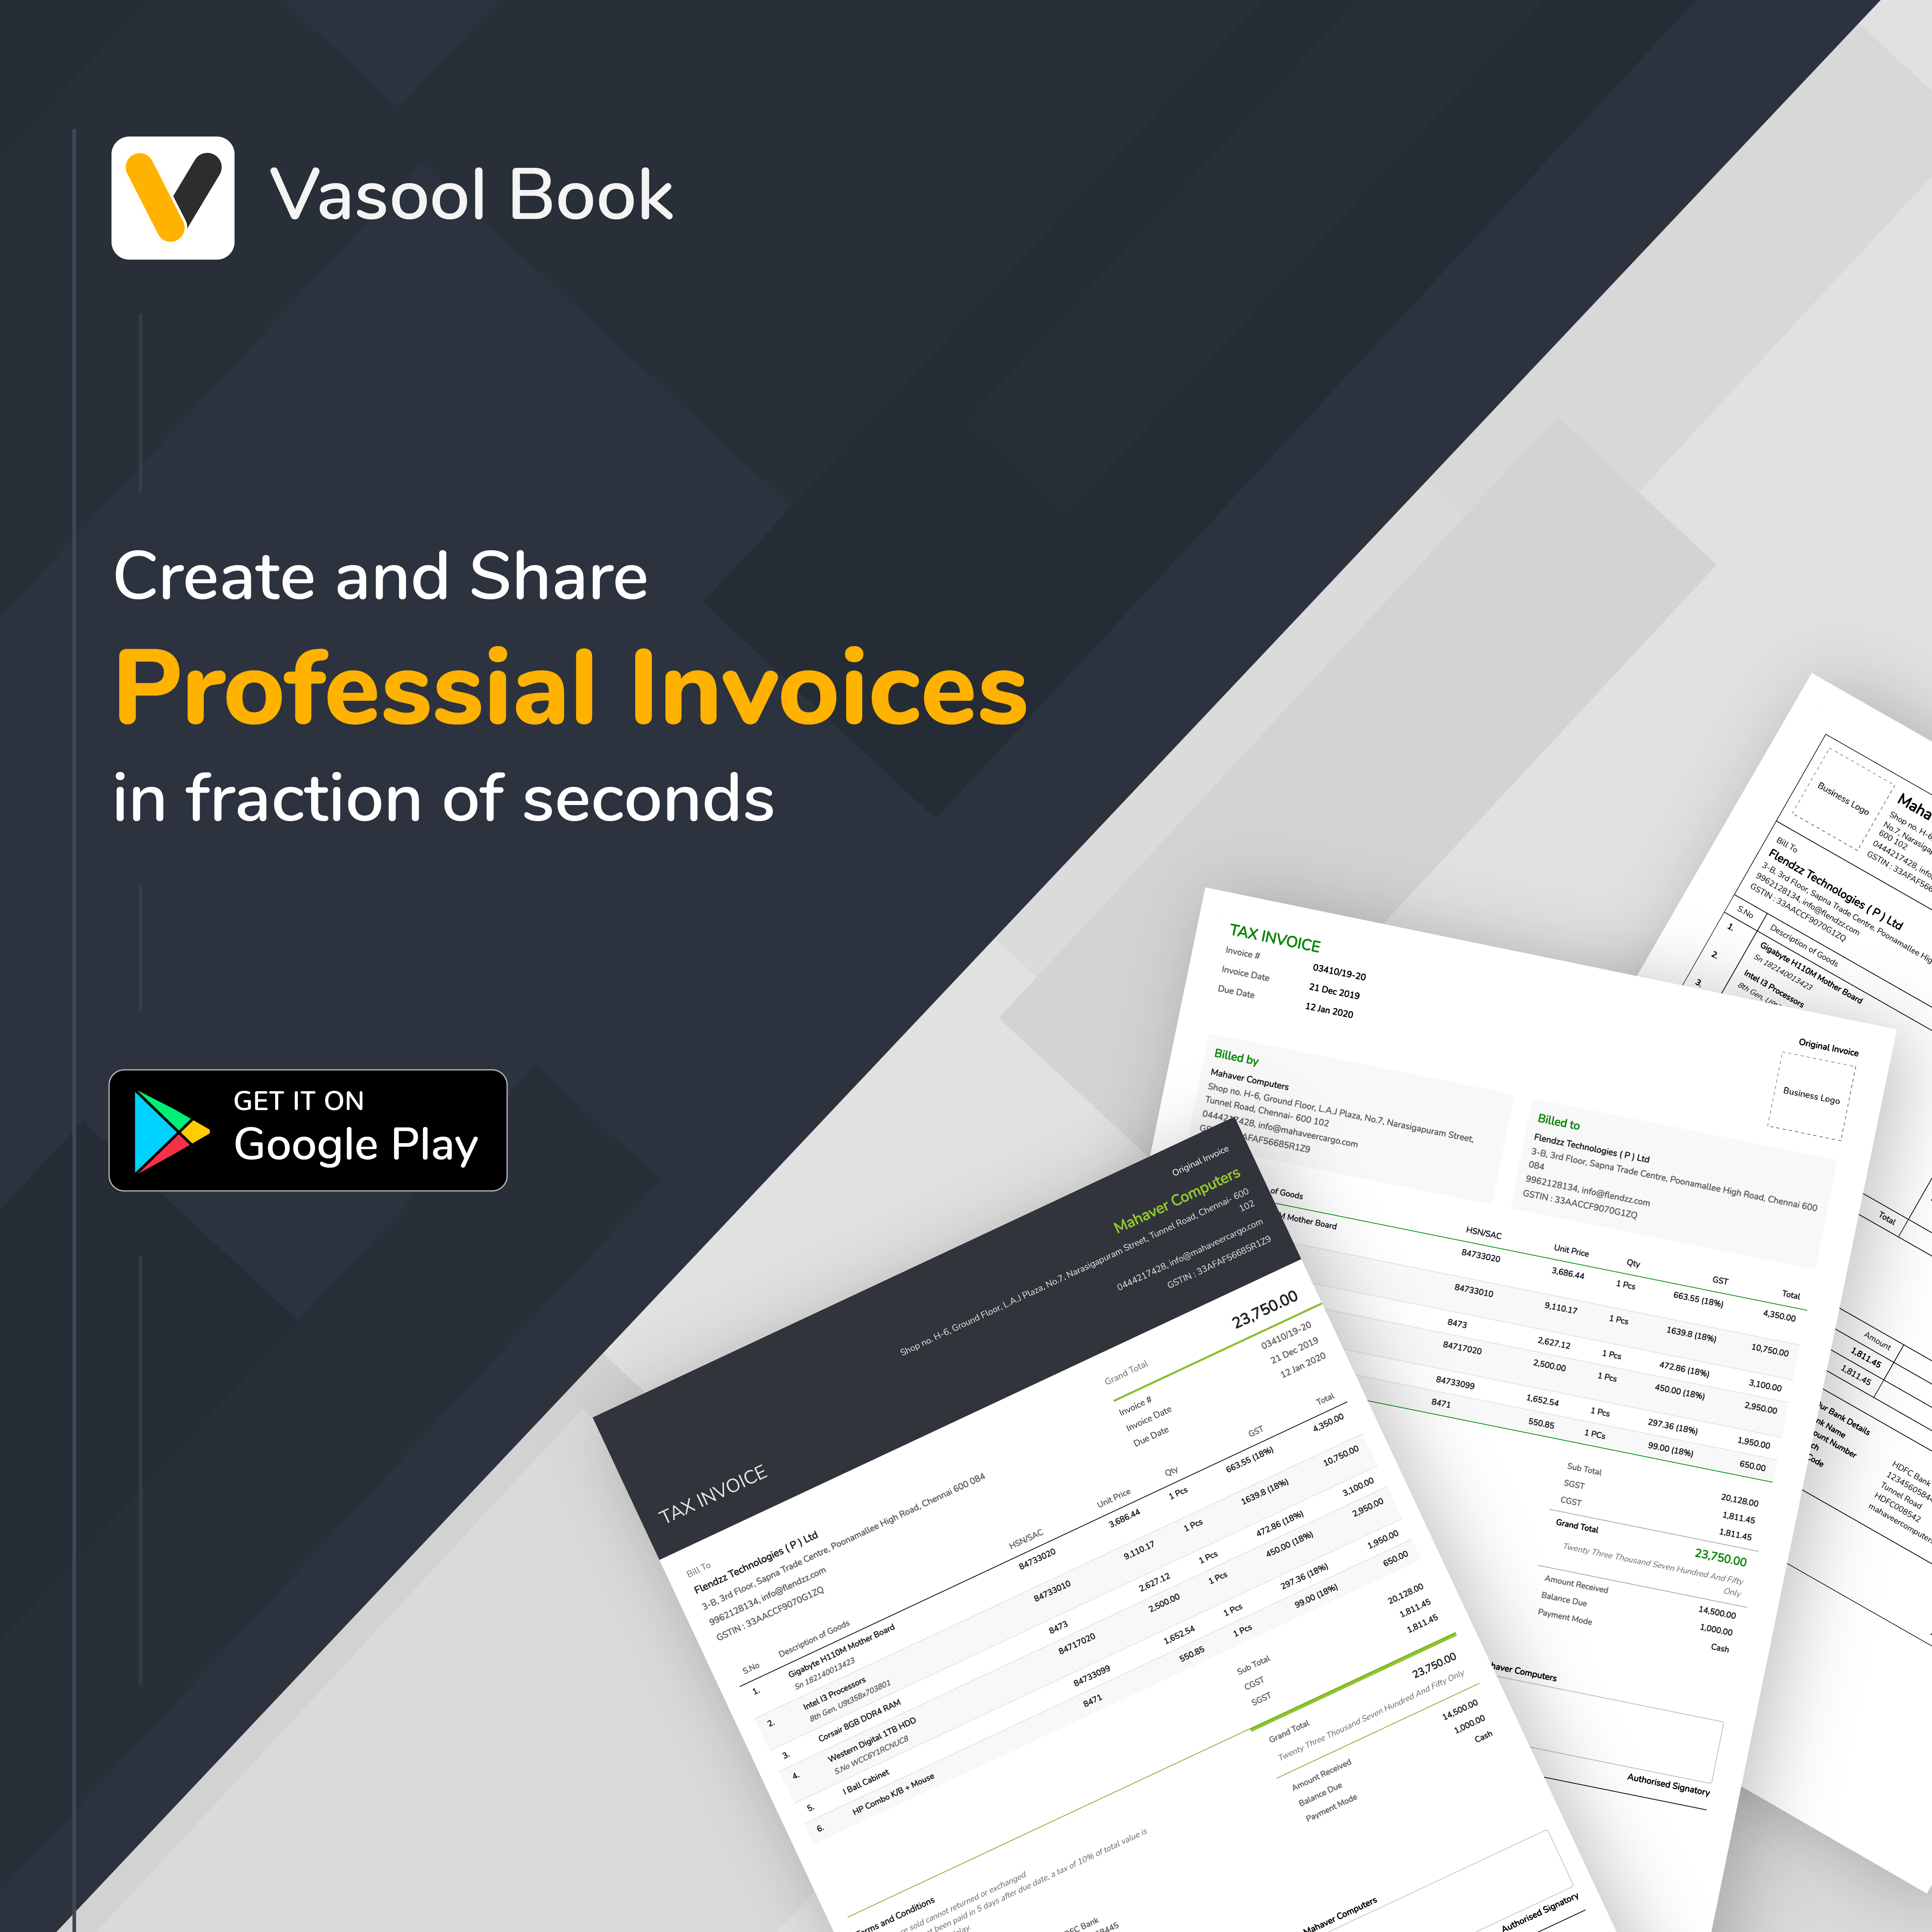 Sale invoices all your sale details are listed along with the add sale action button that allows you to add a new sale.